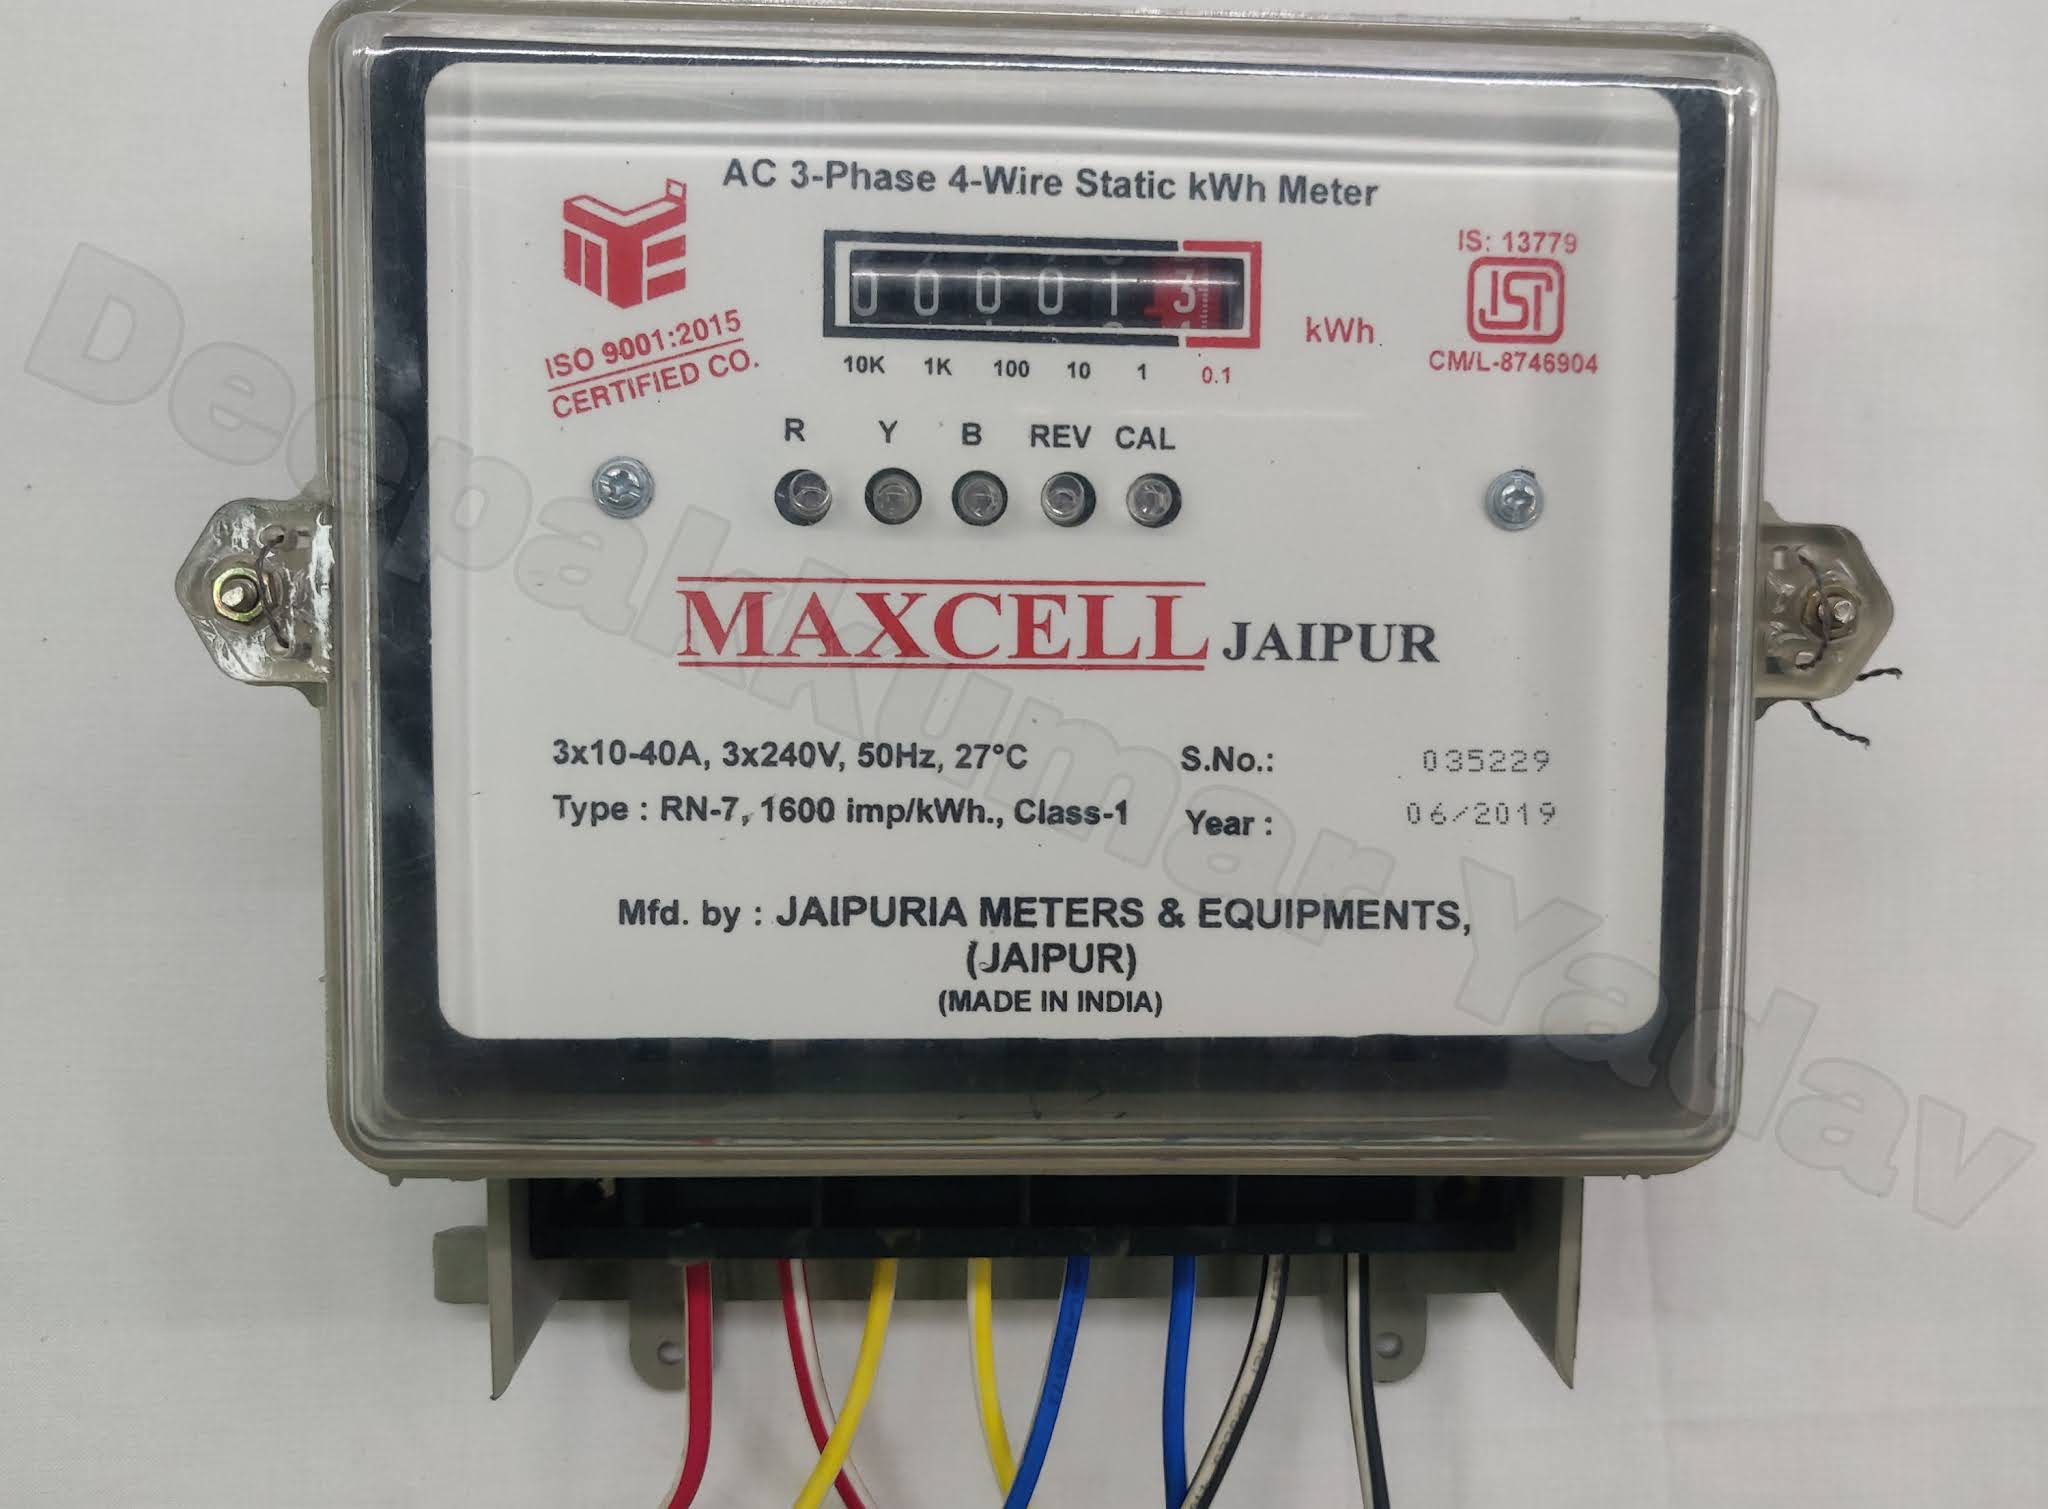 3 Phase Energy Meter Wiring Connection, 3 Phase Metering Wiring Diagrams